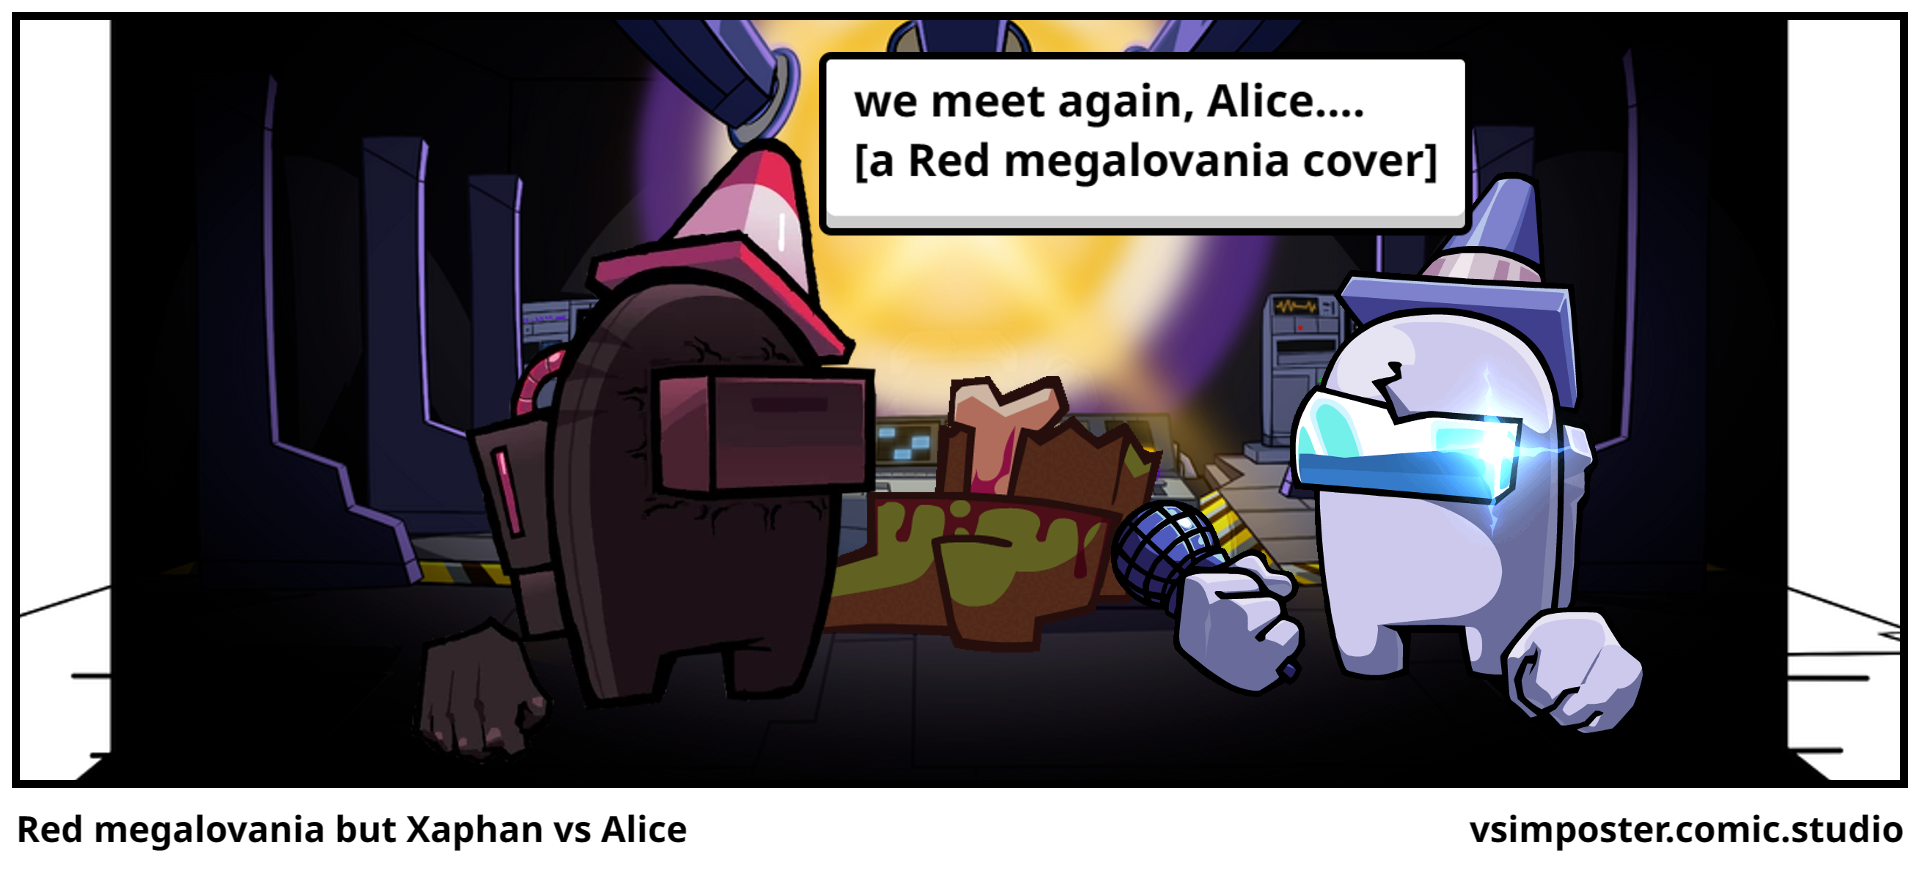 Red megalovania but Xaphan vs Alice